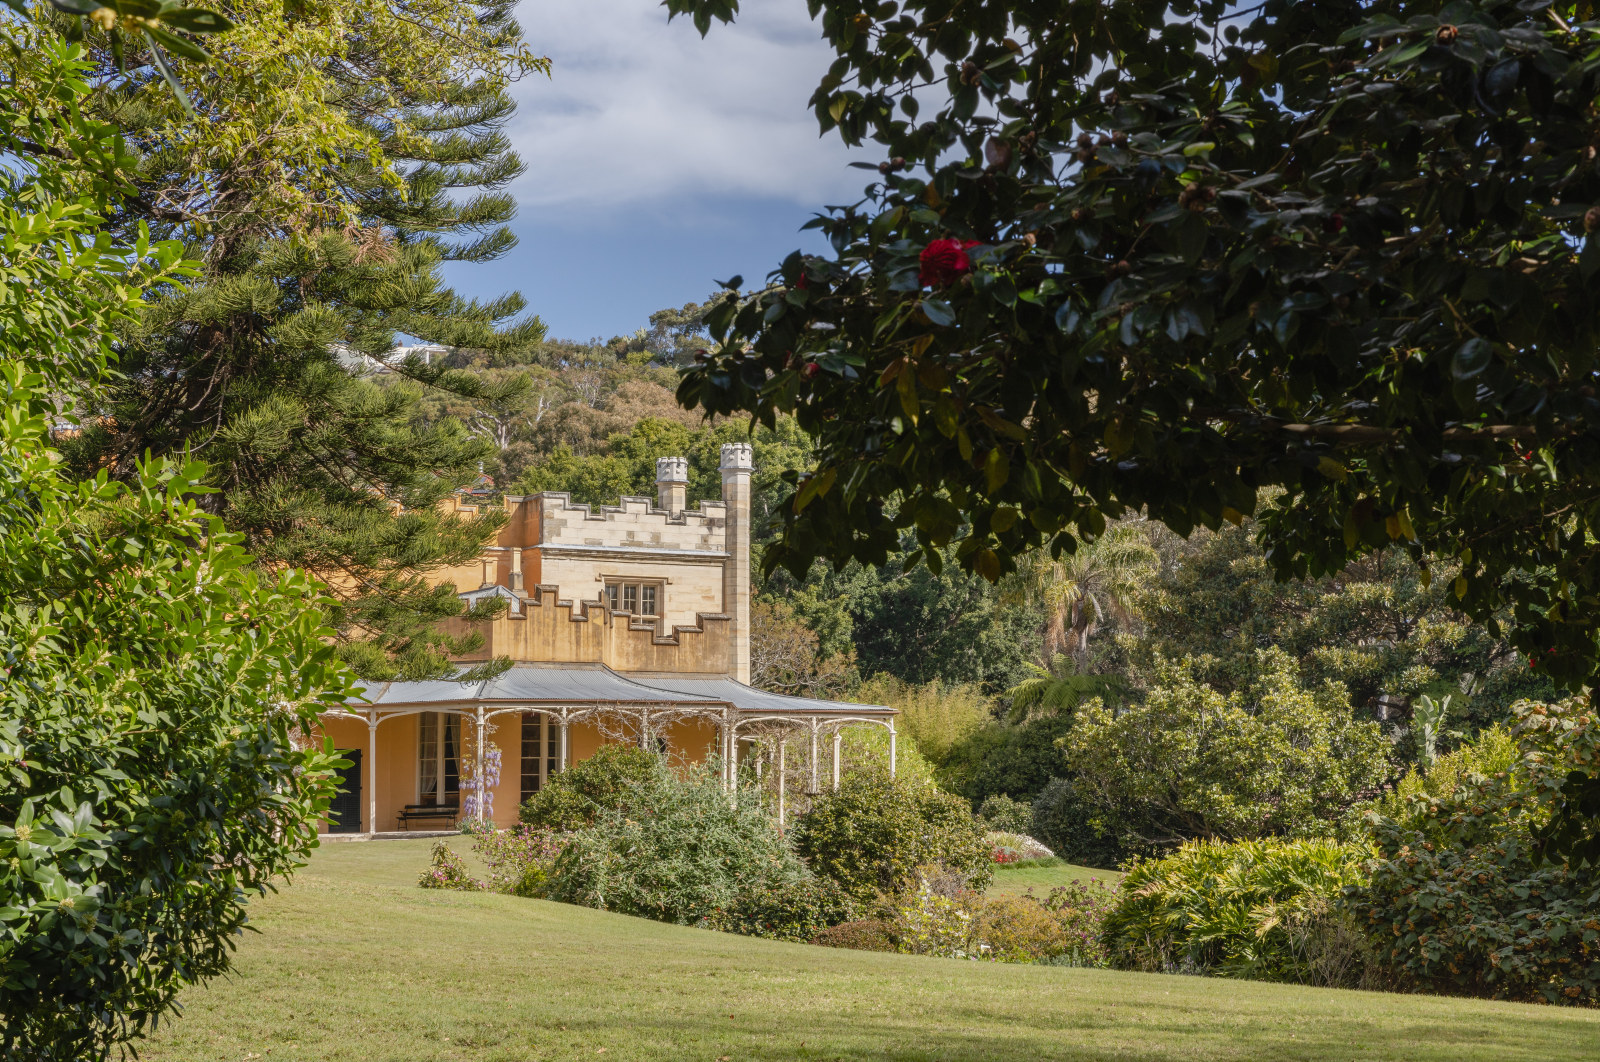 View of Vaucluse House and pleasure garden